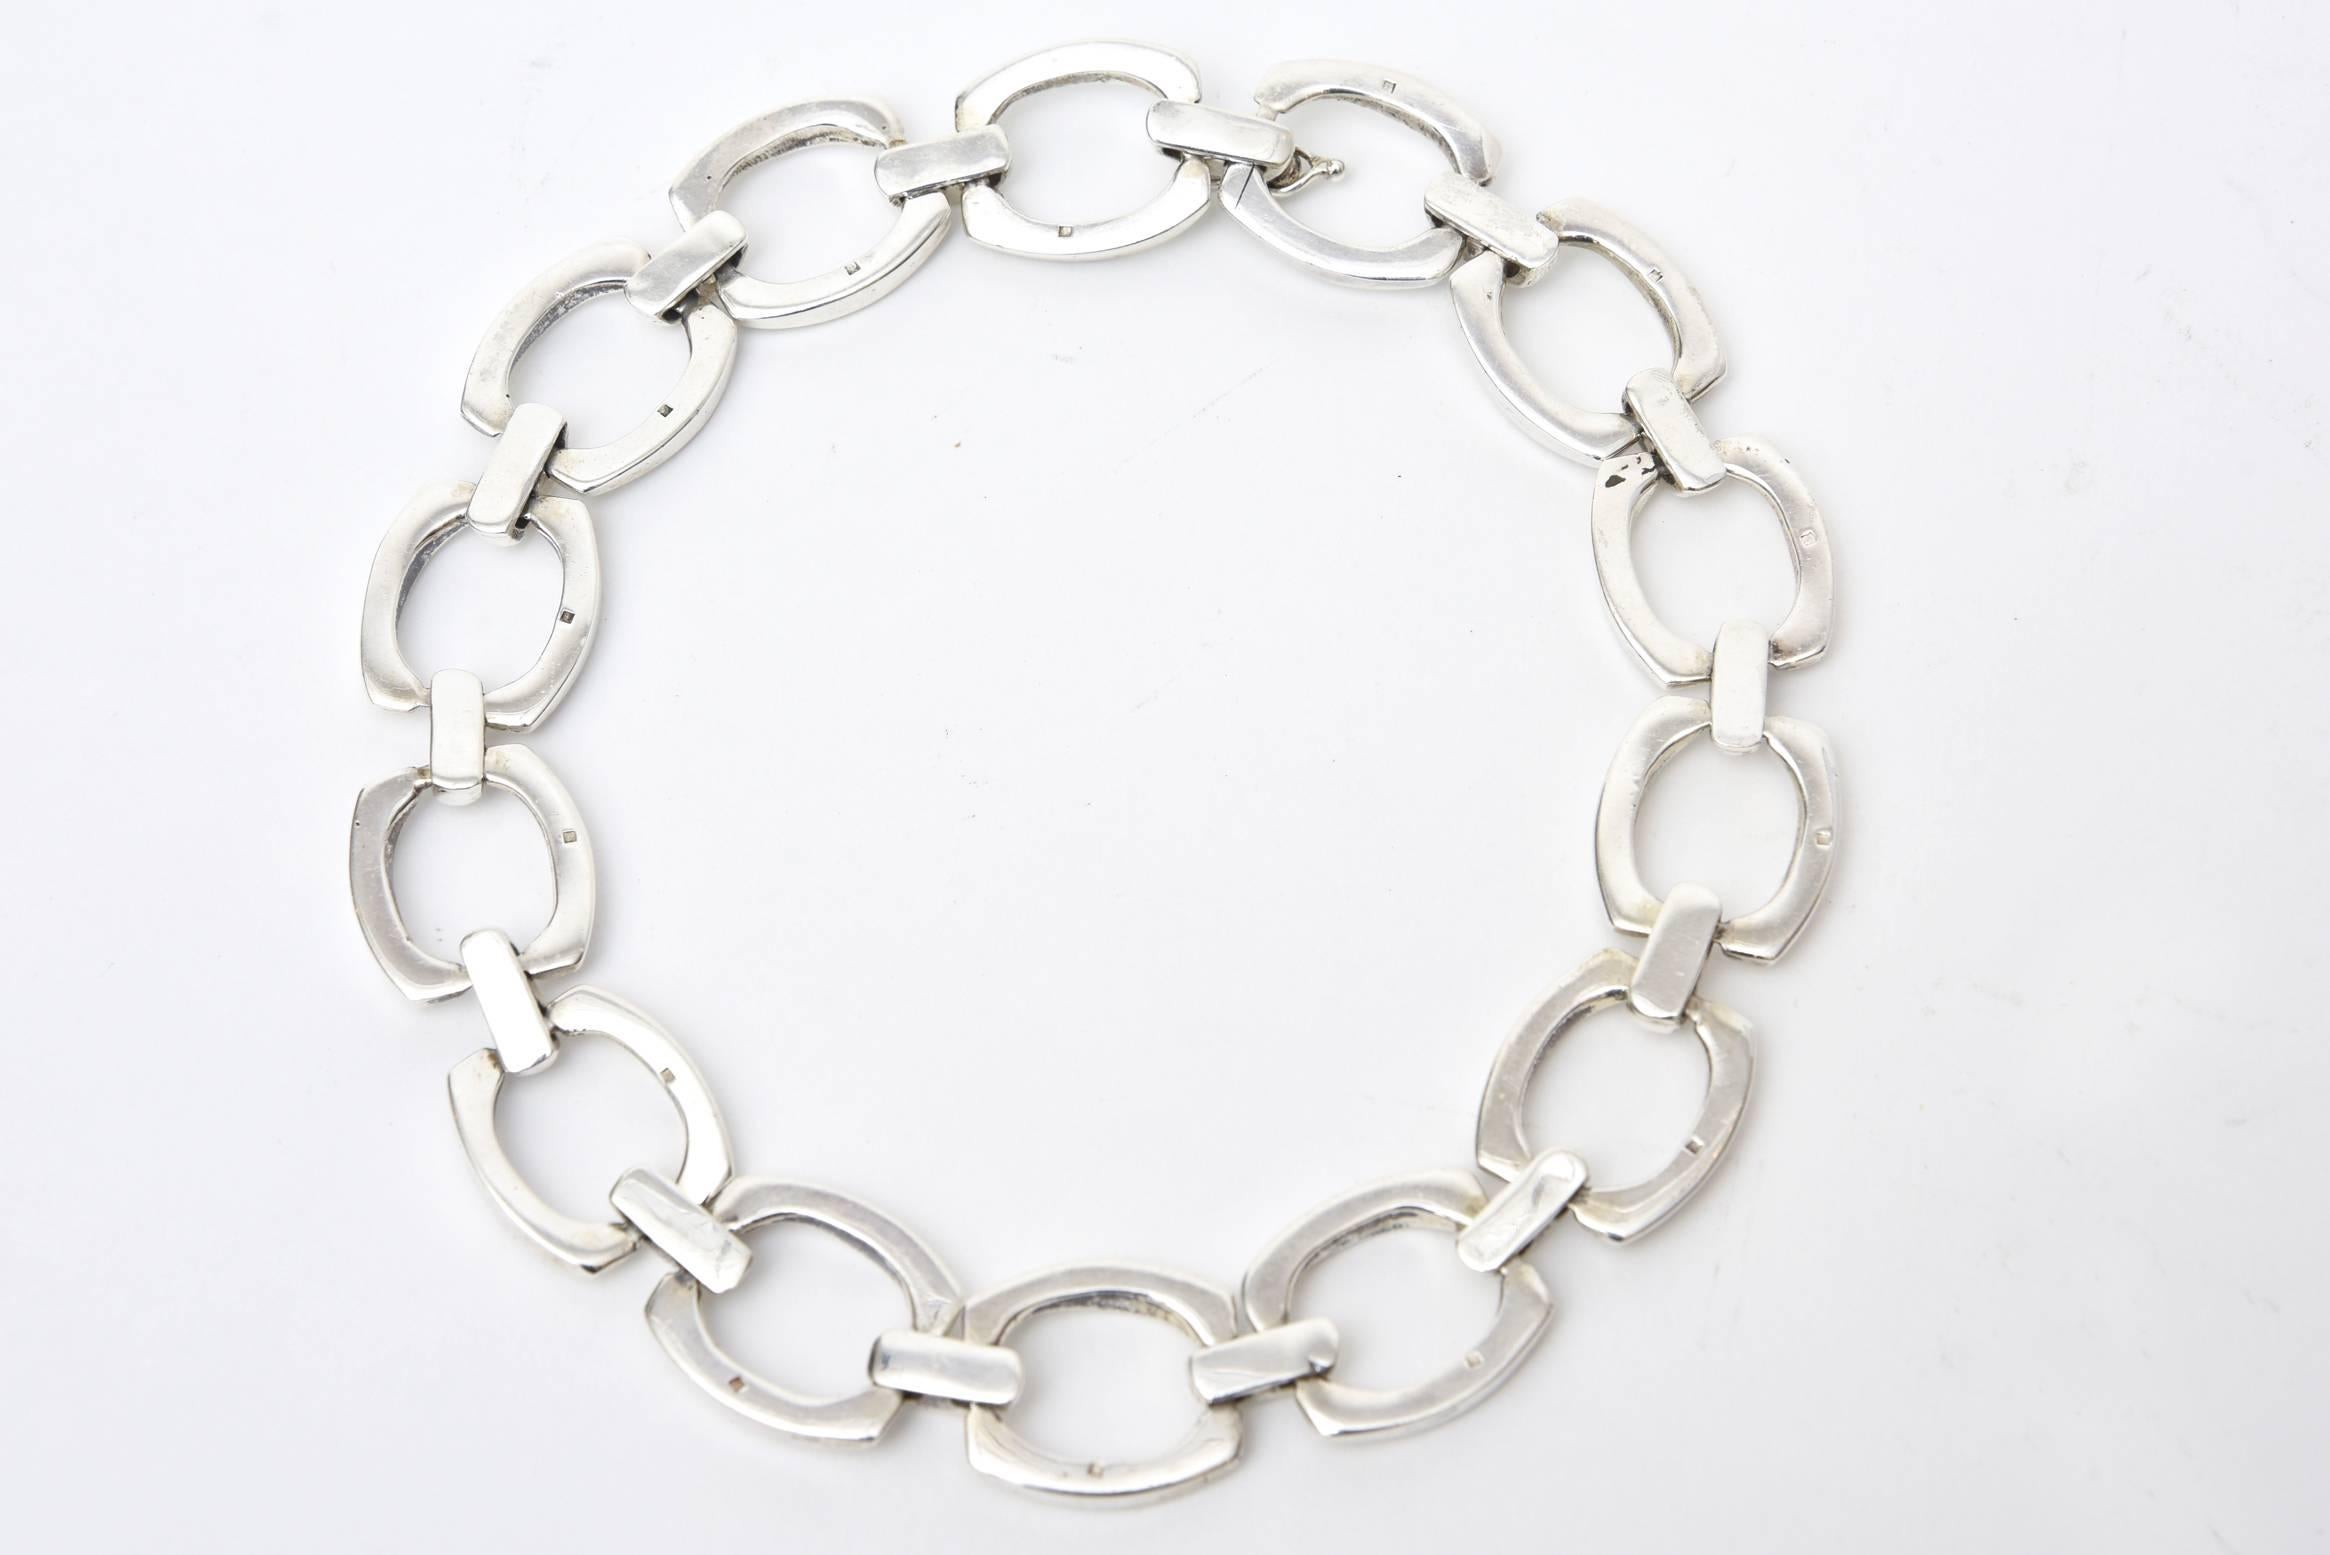 This stunning on heavy and chinky sterling silver link necklace has a markings on each link. It is either french or English. We do not know what the markings  and are at this research point. It is vintage from the 60's. Each link has a marking. The